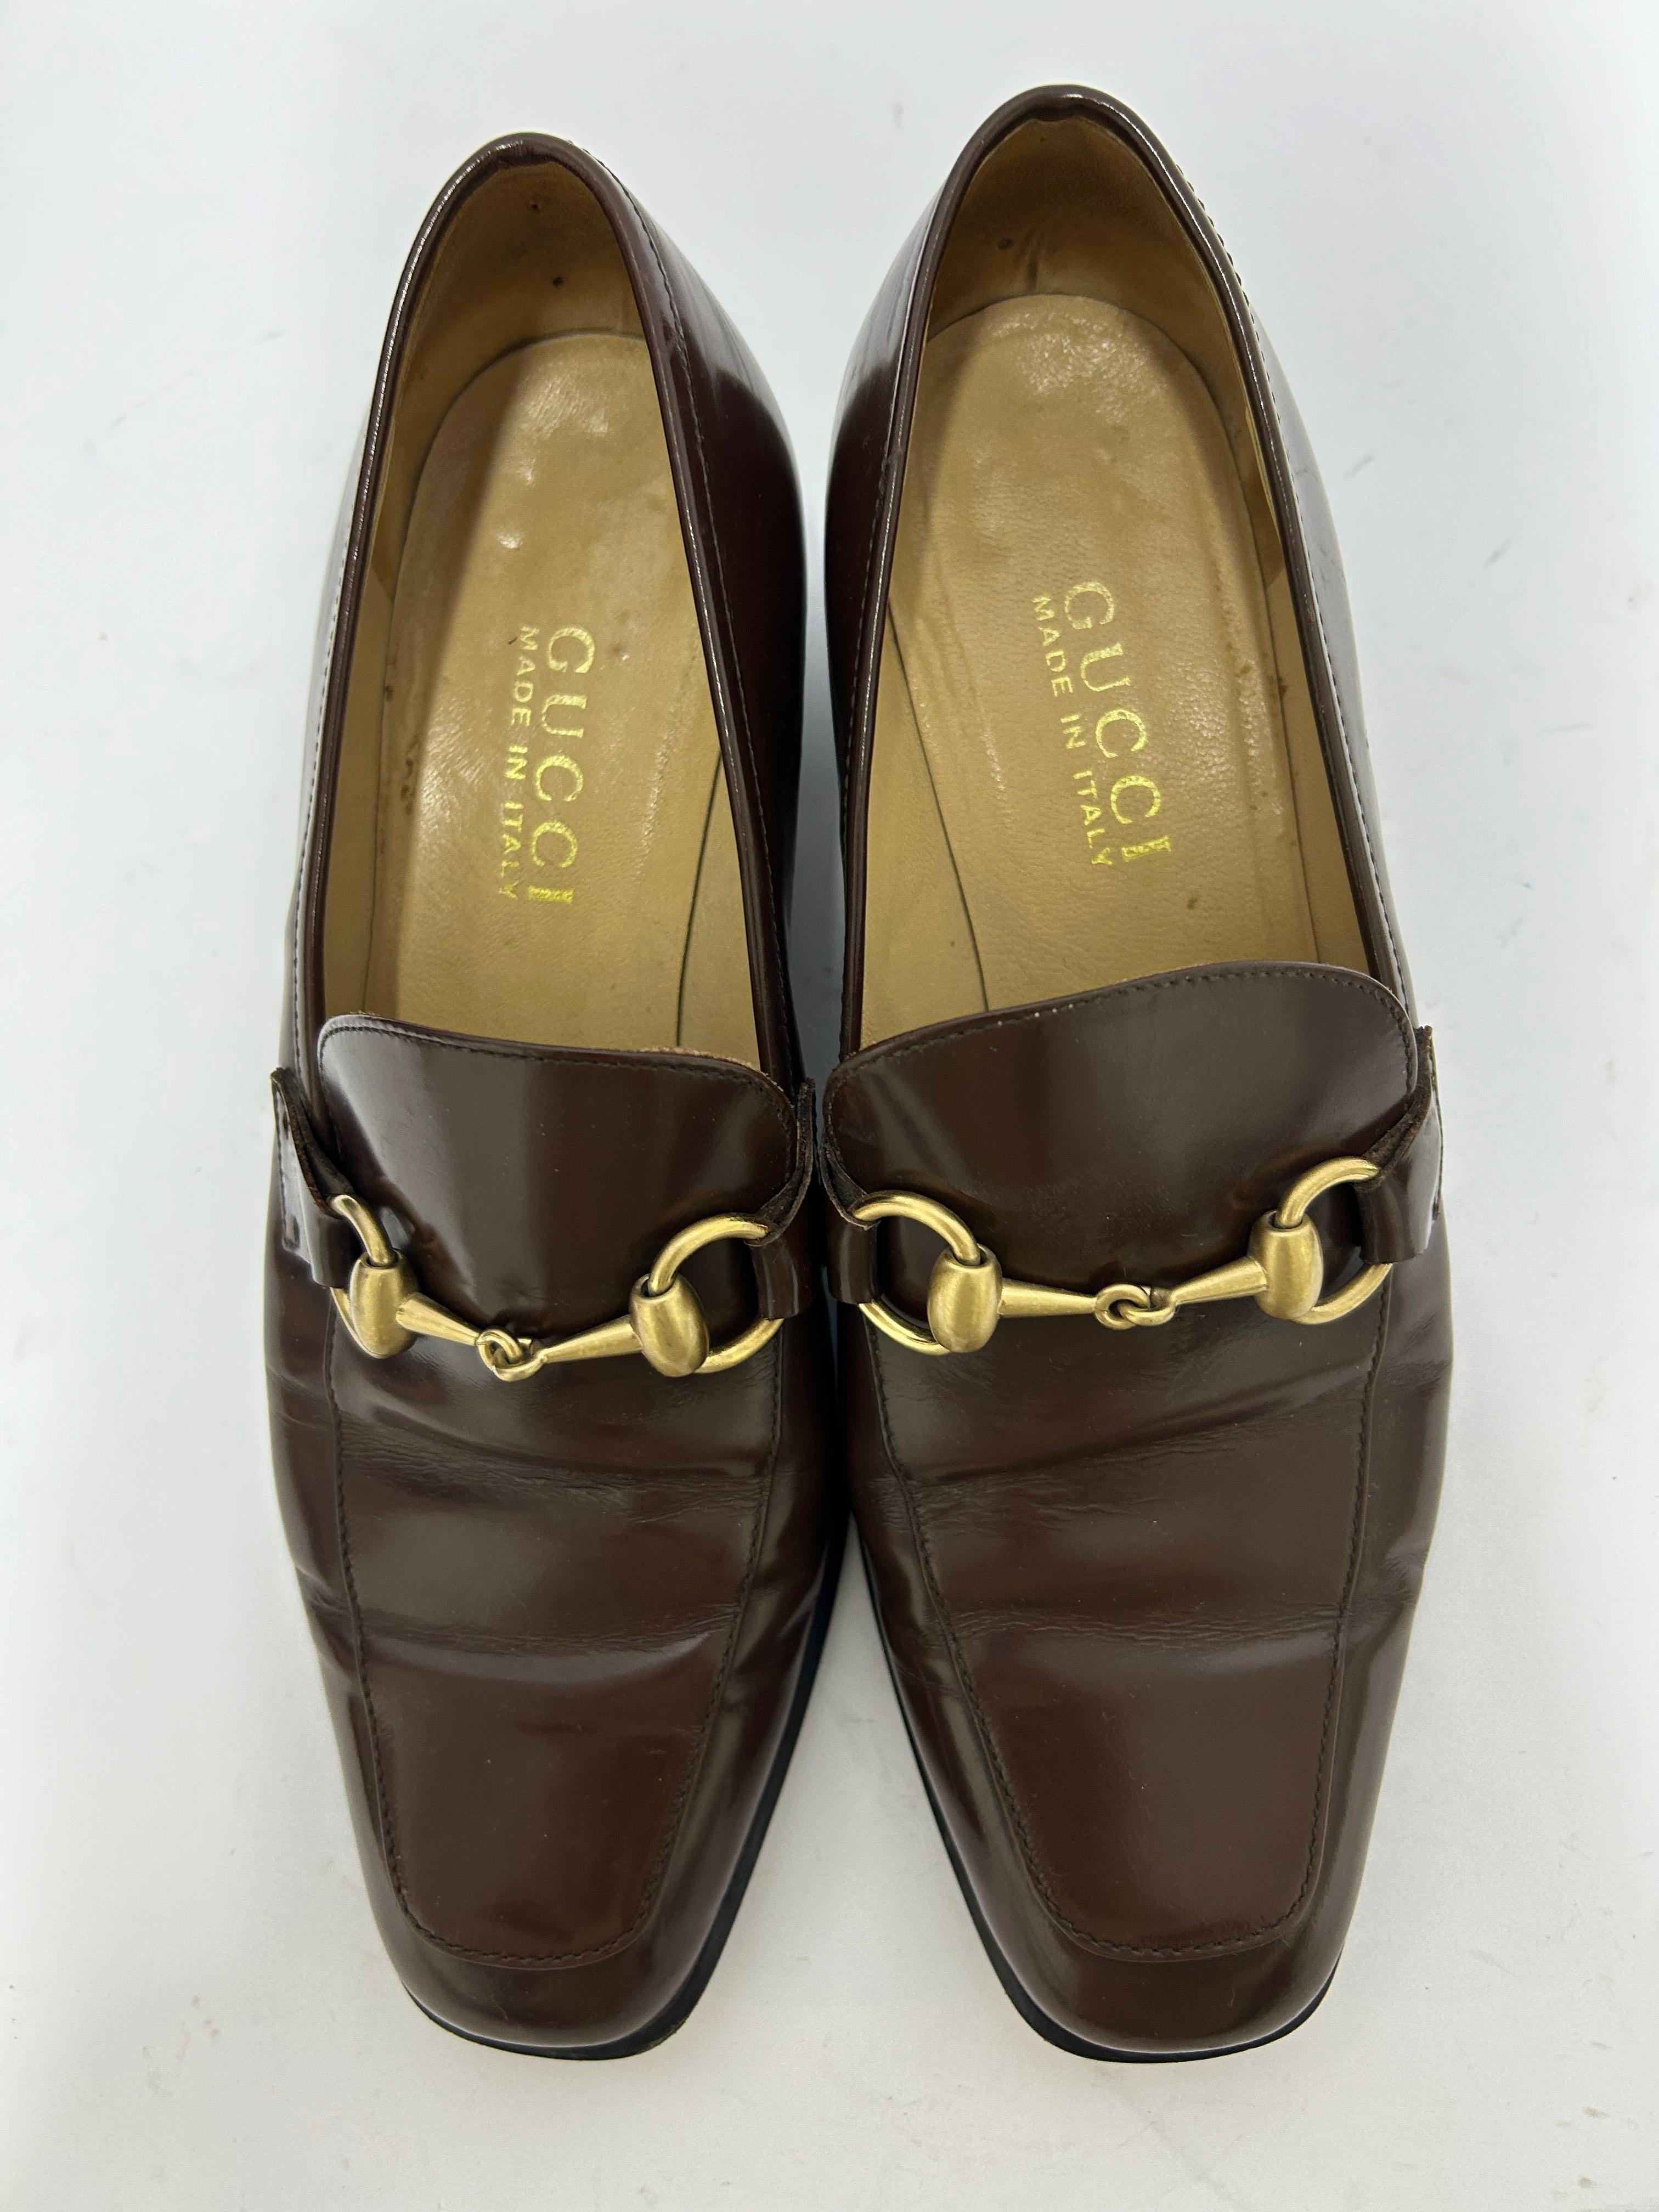 Gucci Horsebit Leather Loafers Size EU 36.5 For Sale 2